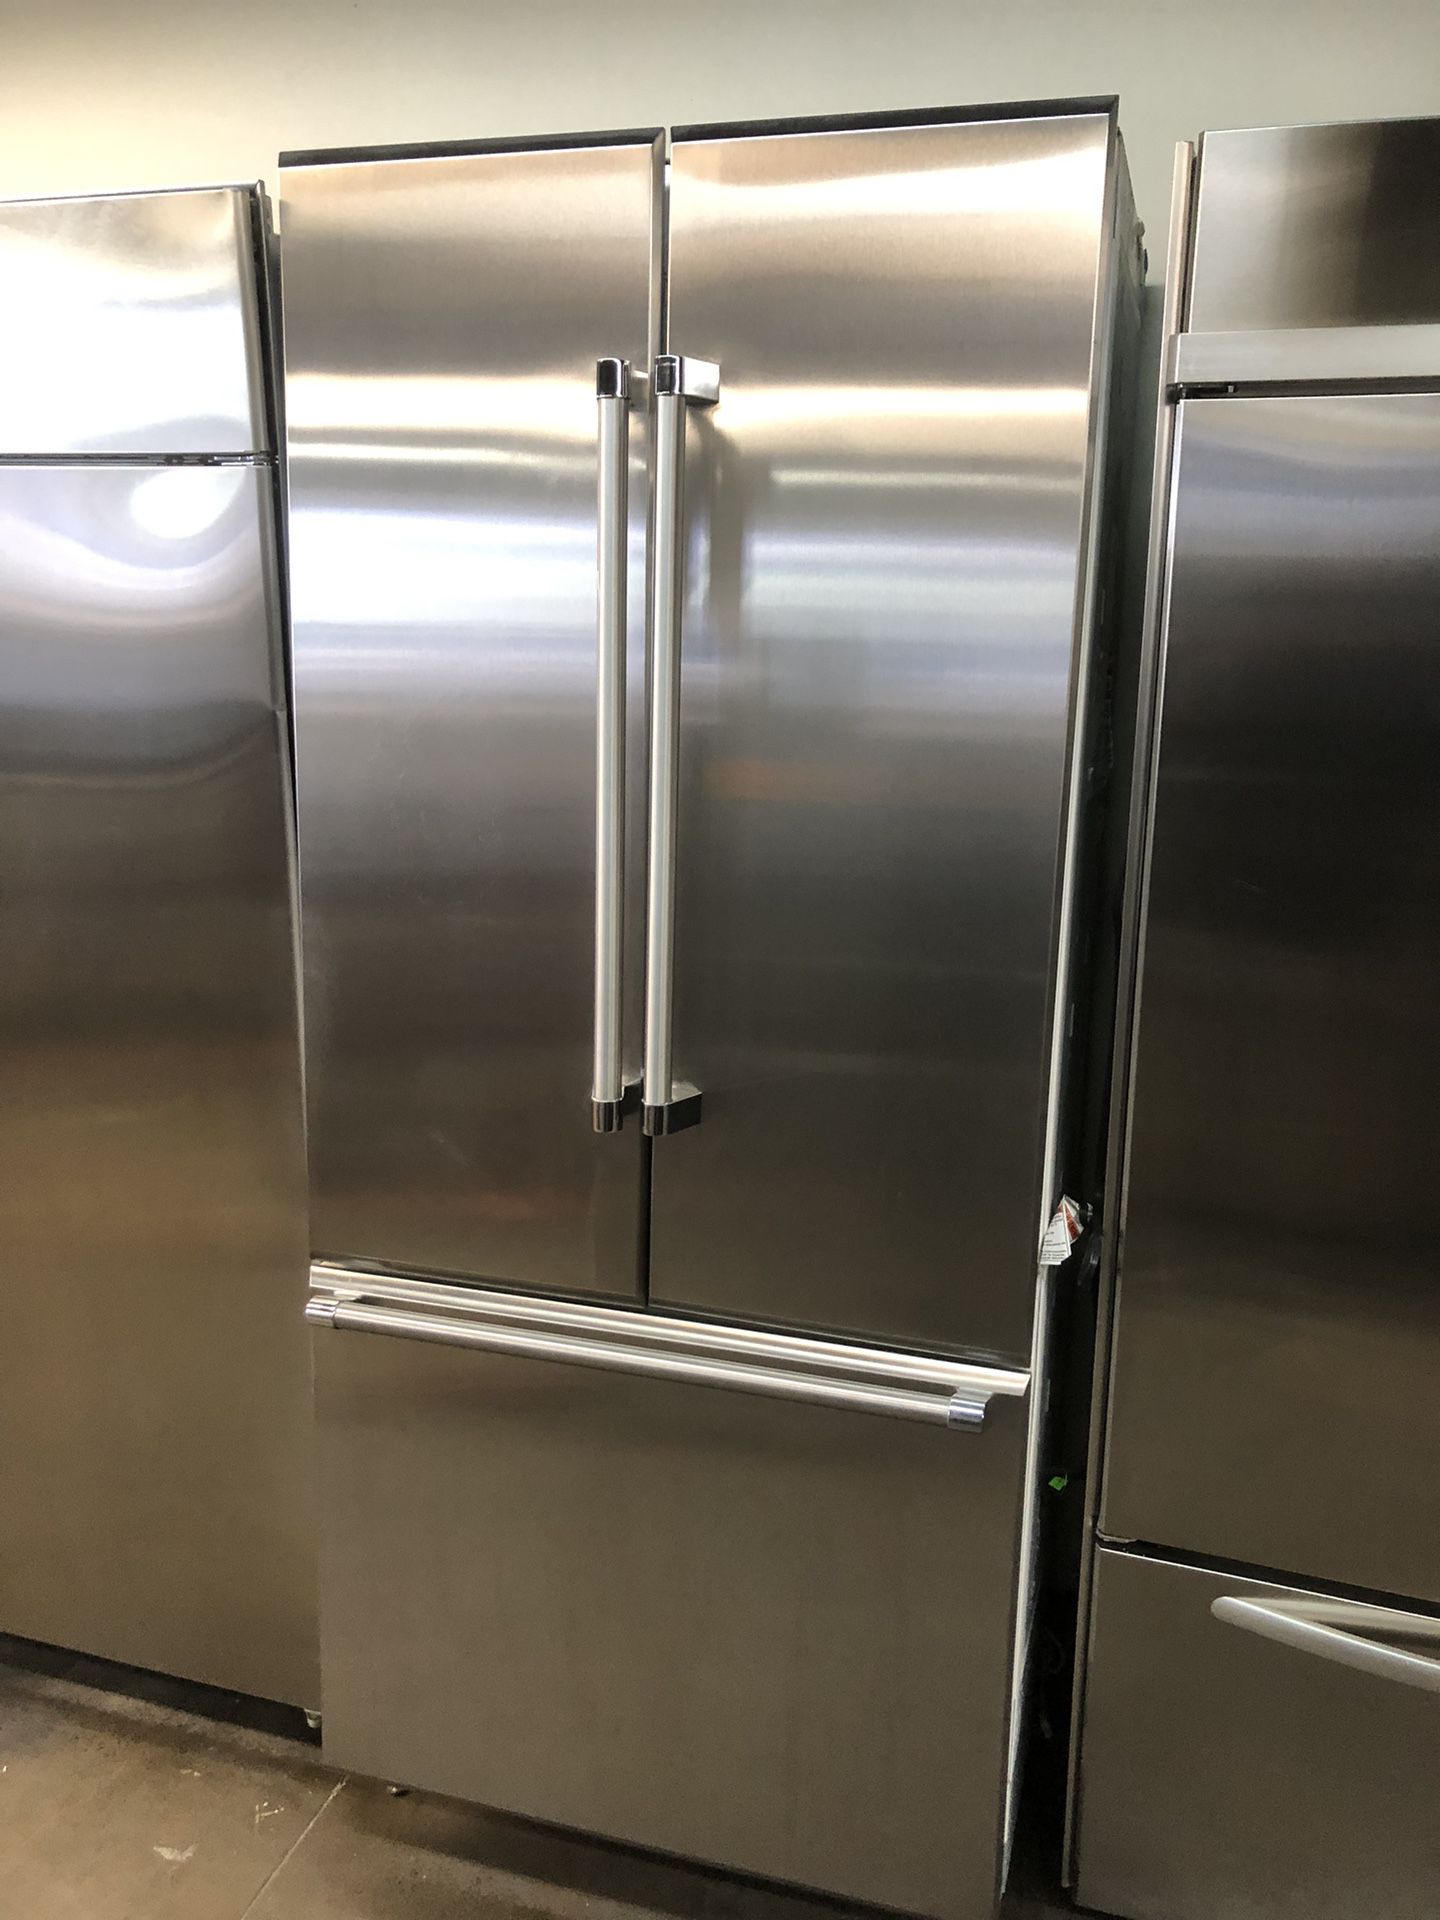 Thermador 36” Stainless Steel Panel Ready Built In French Door Refrigerator 